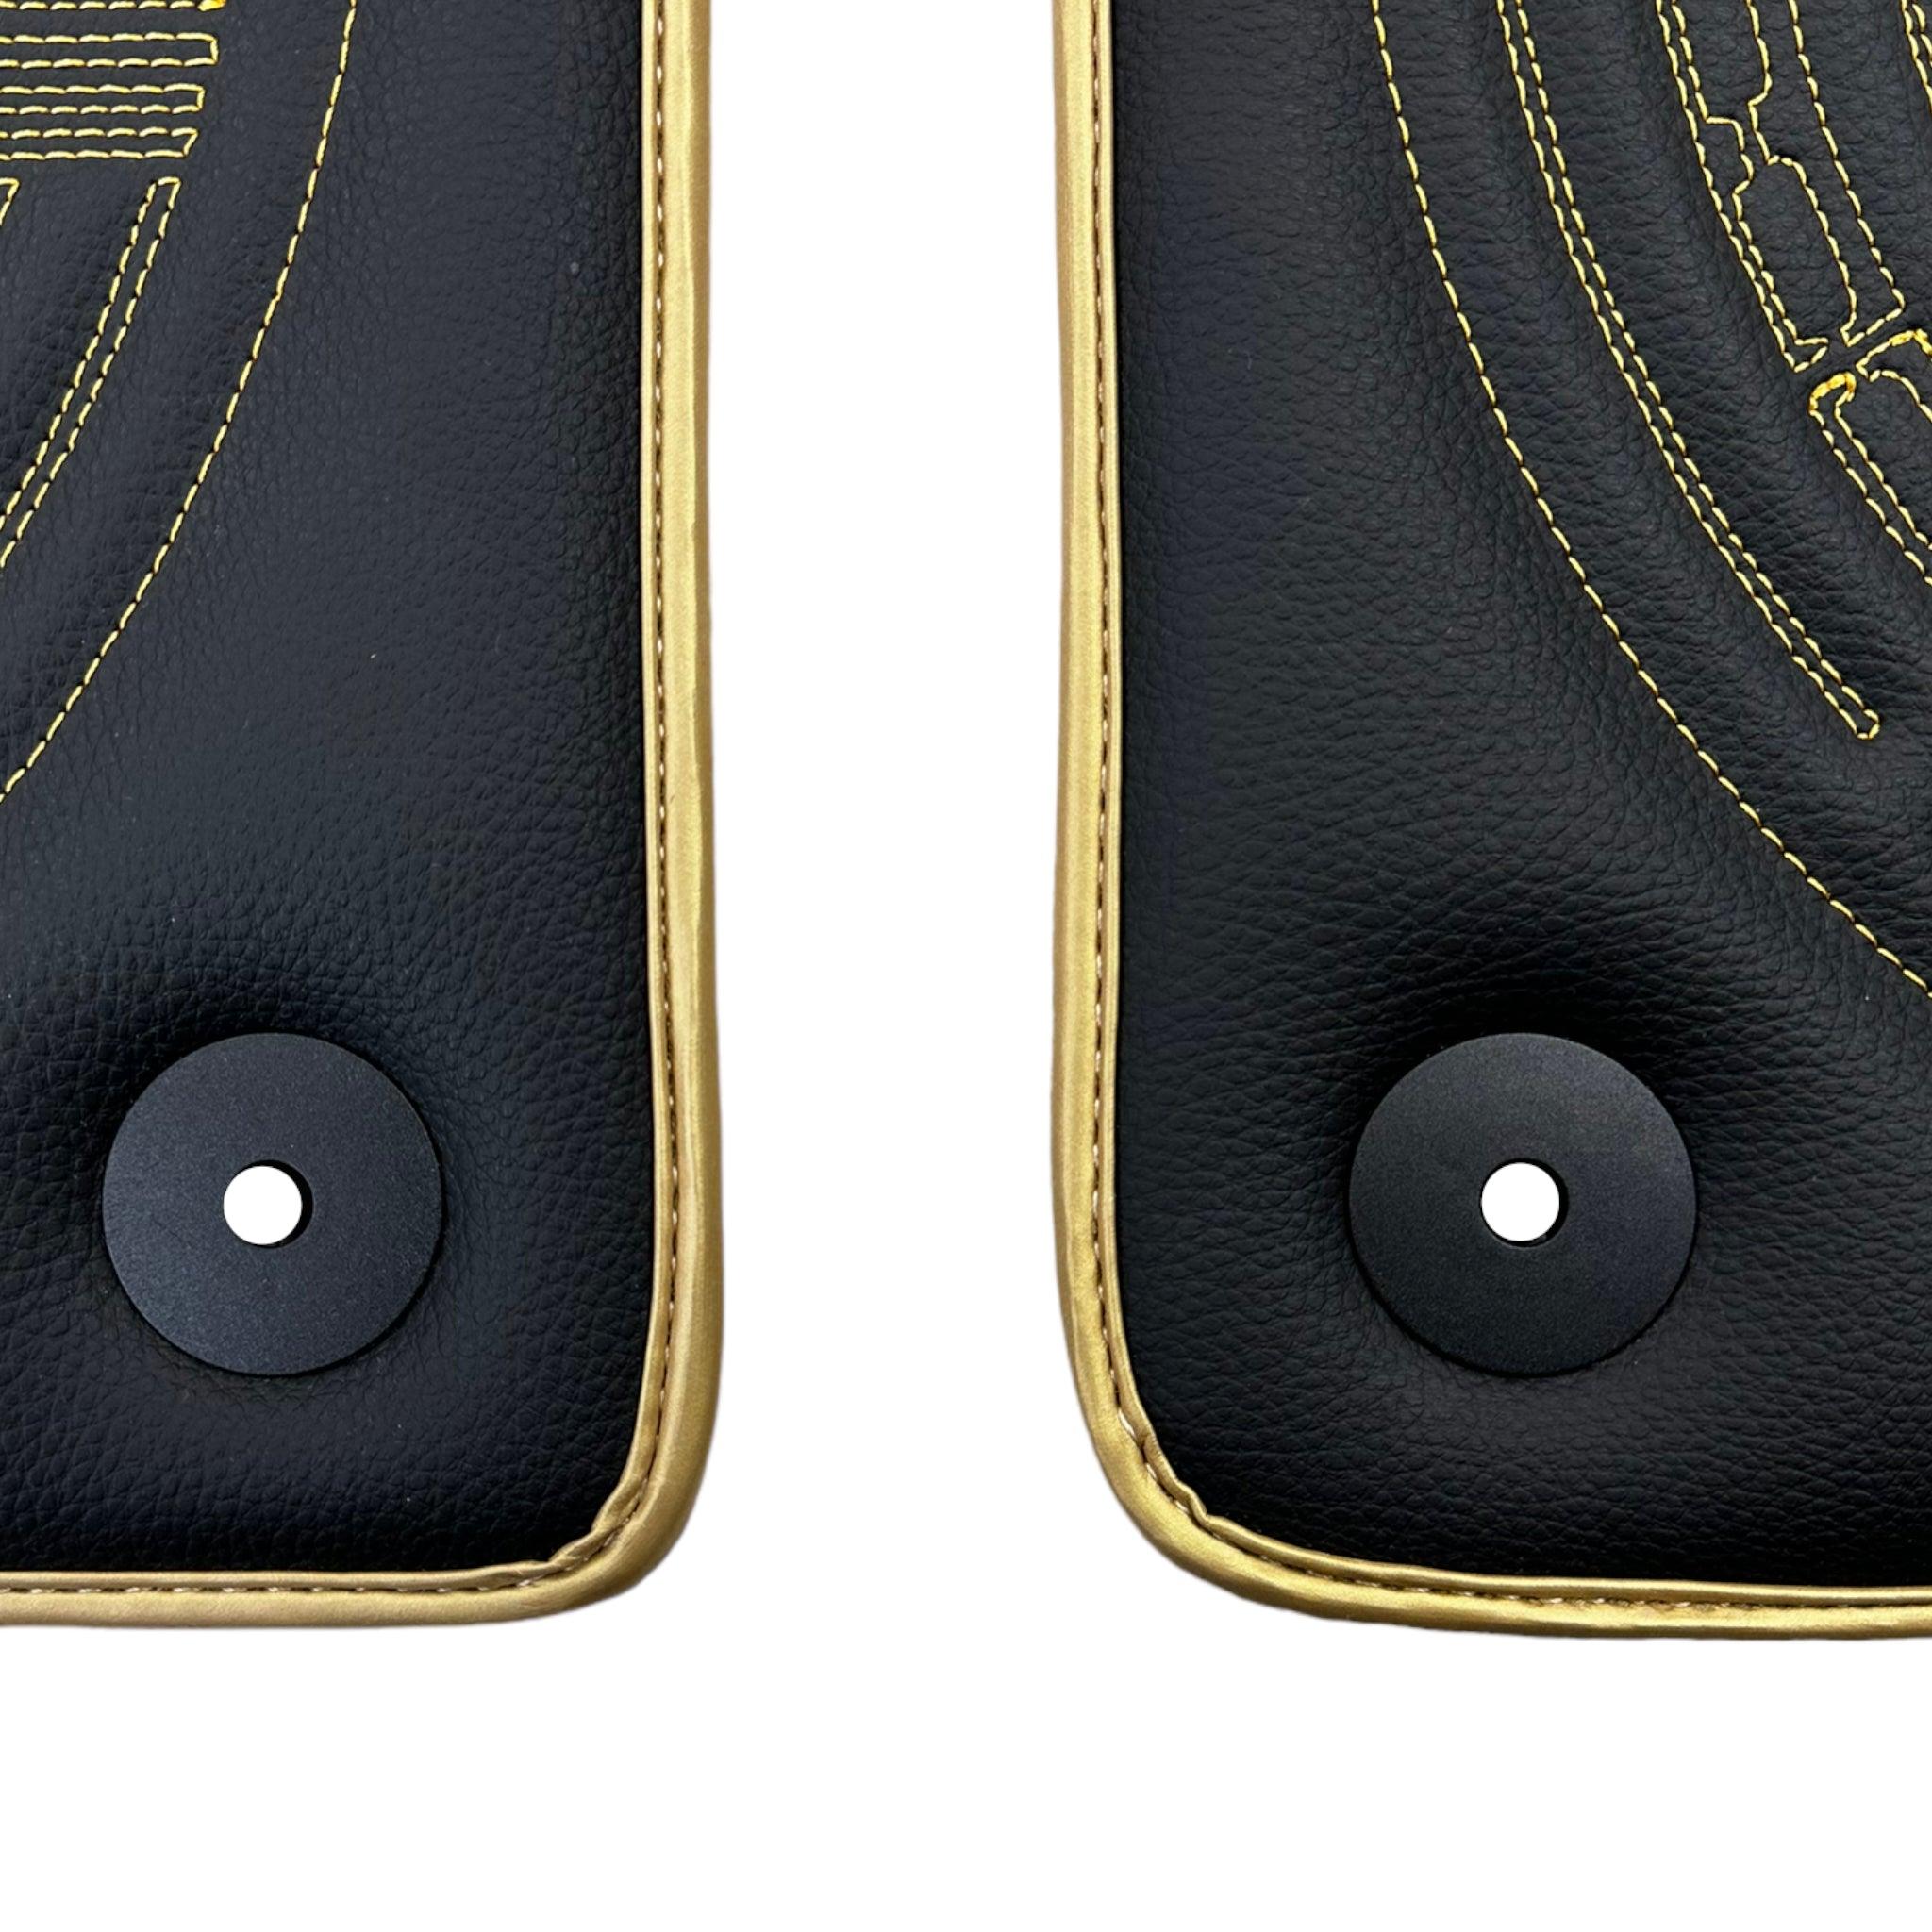 Leather Floor Mats for Lamborghini Aventador with "Bitcoin" Sewing